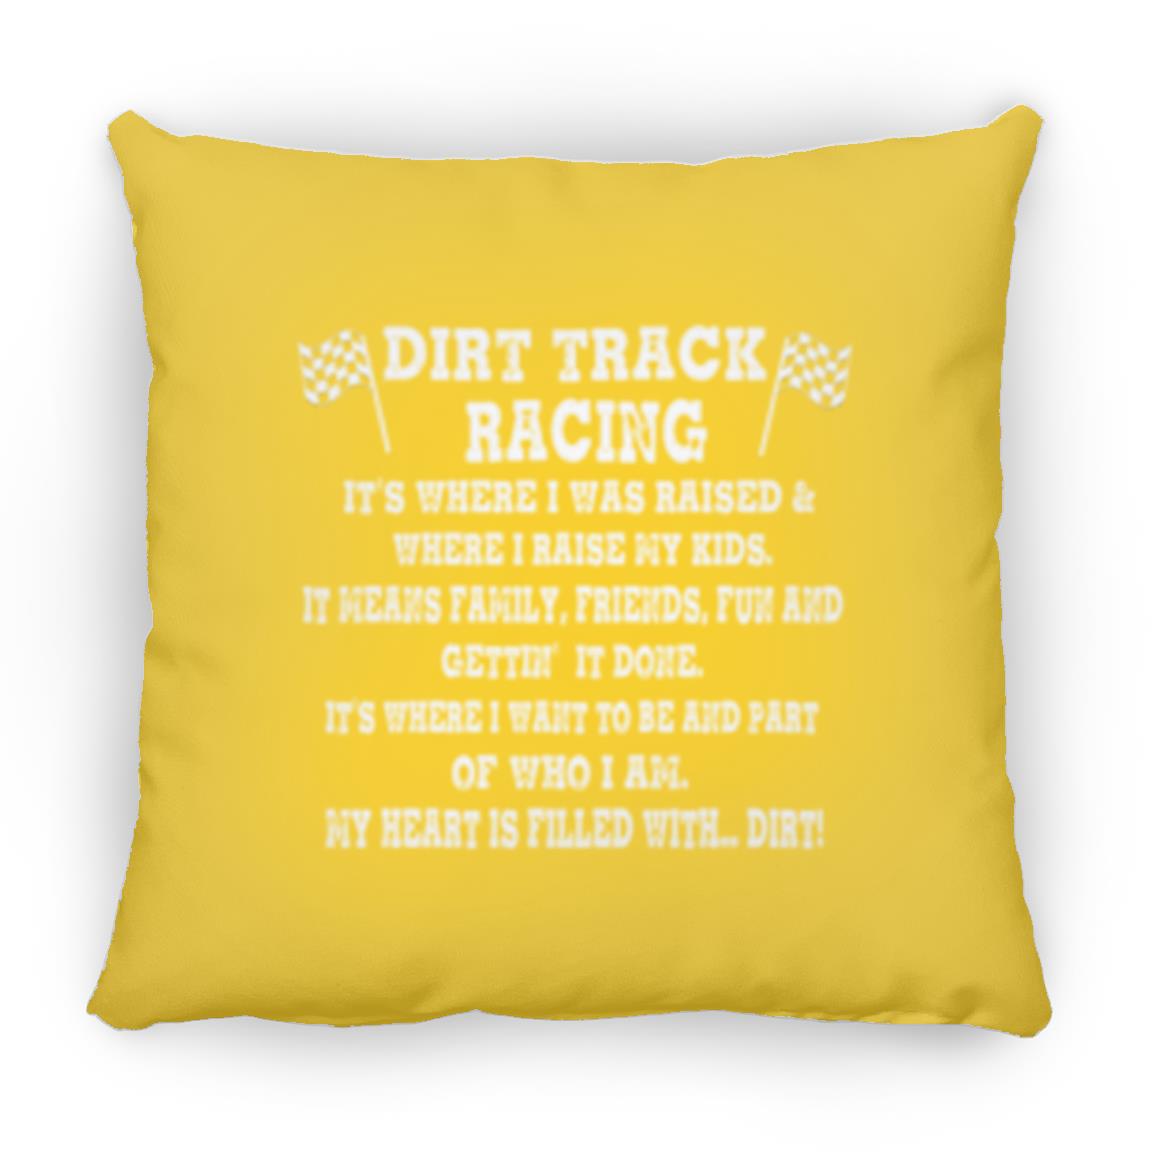 Dirt Track Racing It's Where I Was Raised Small Square Pillow